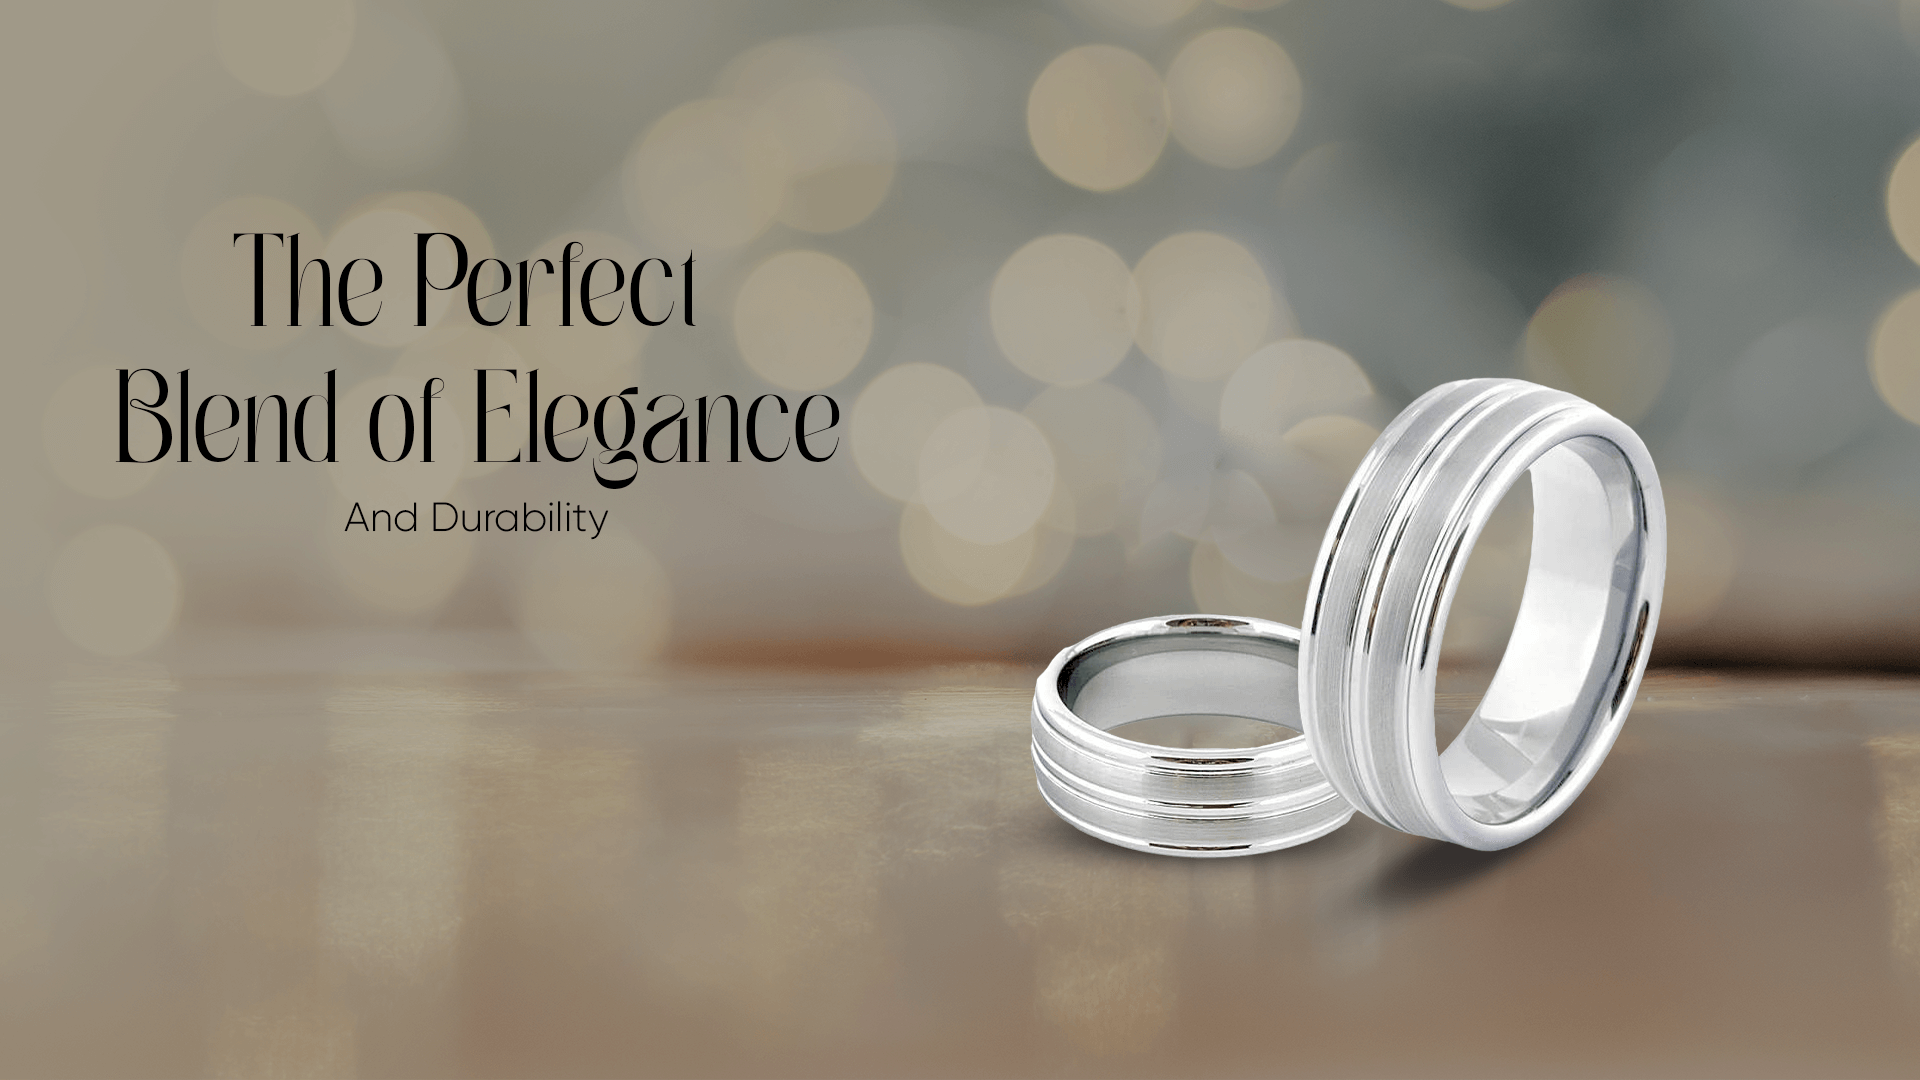 White Tungsten Rings: The Perfect Blend of Elegance and Durability